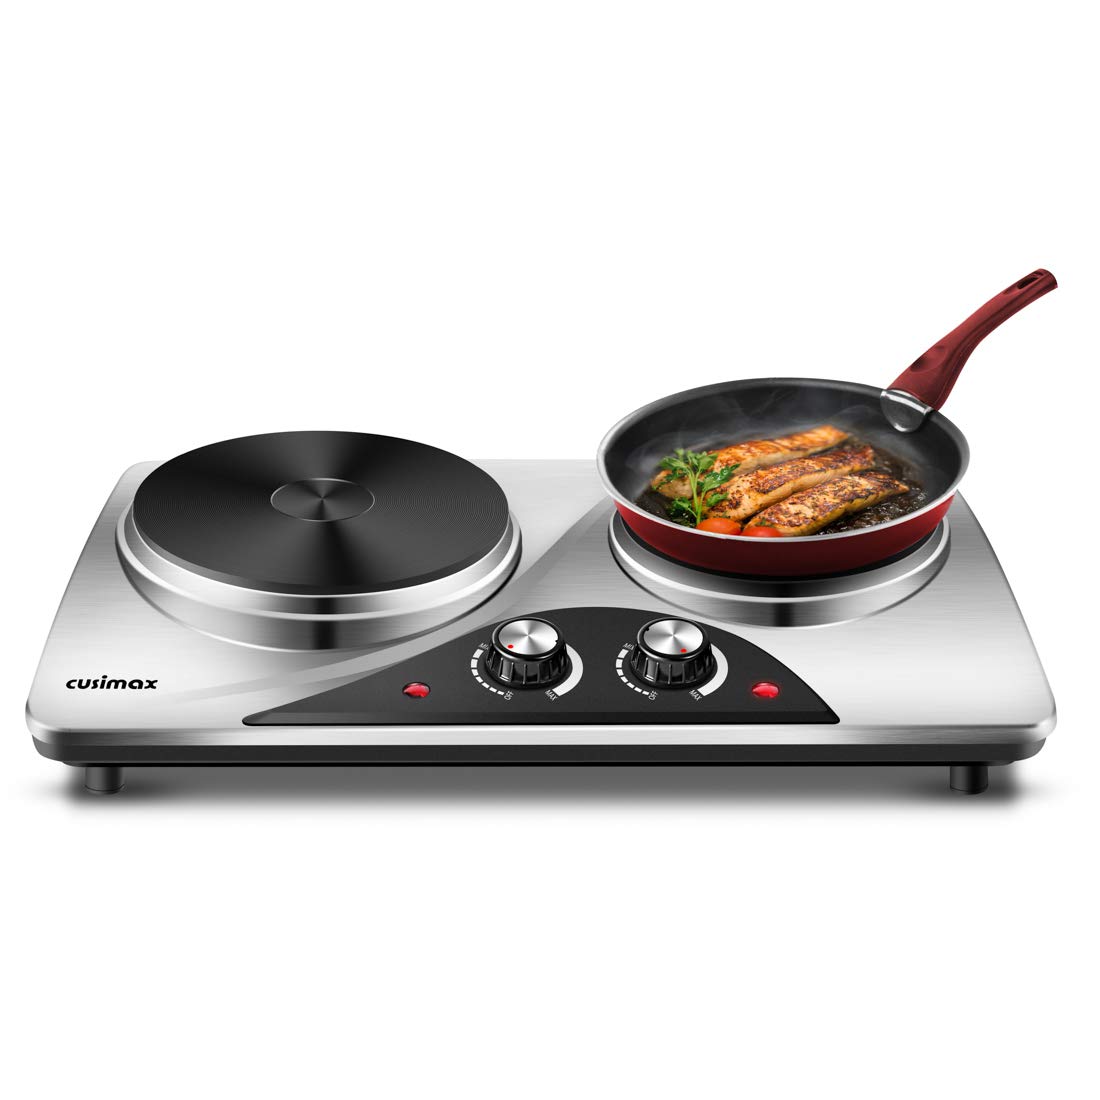 Cusimax Double Hot Plate For Cooking,stainless Steel Electric